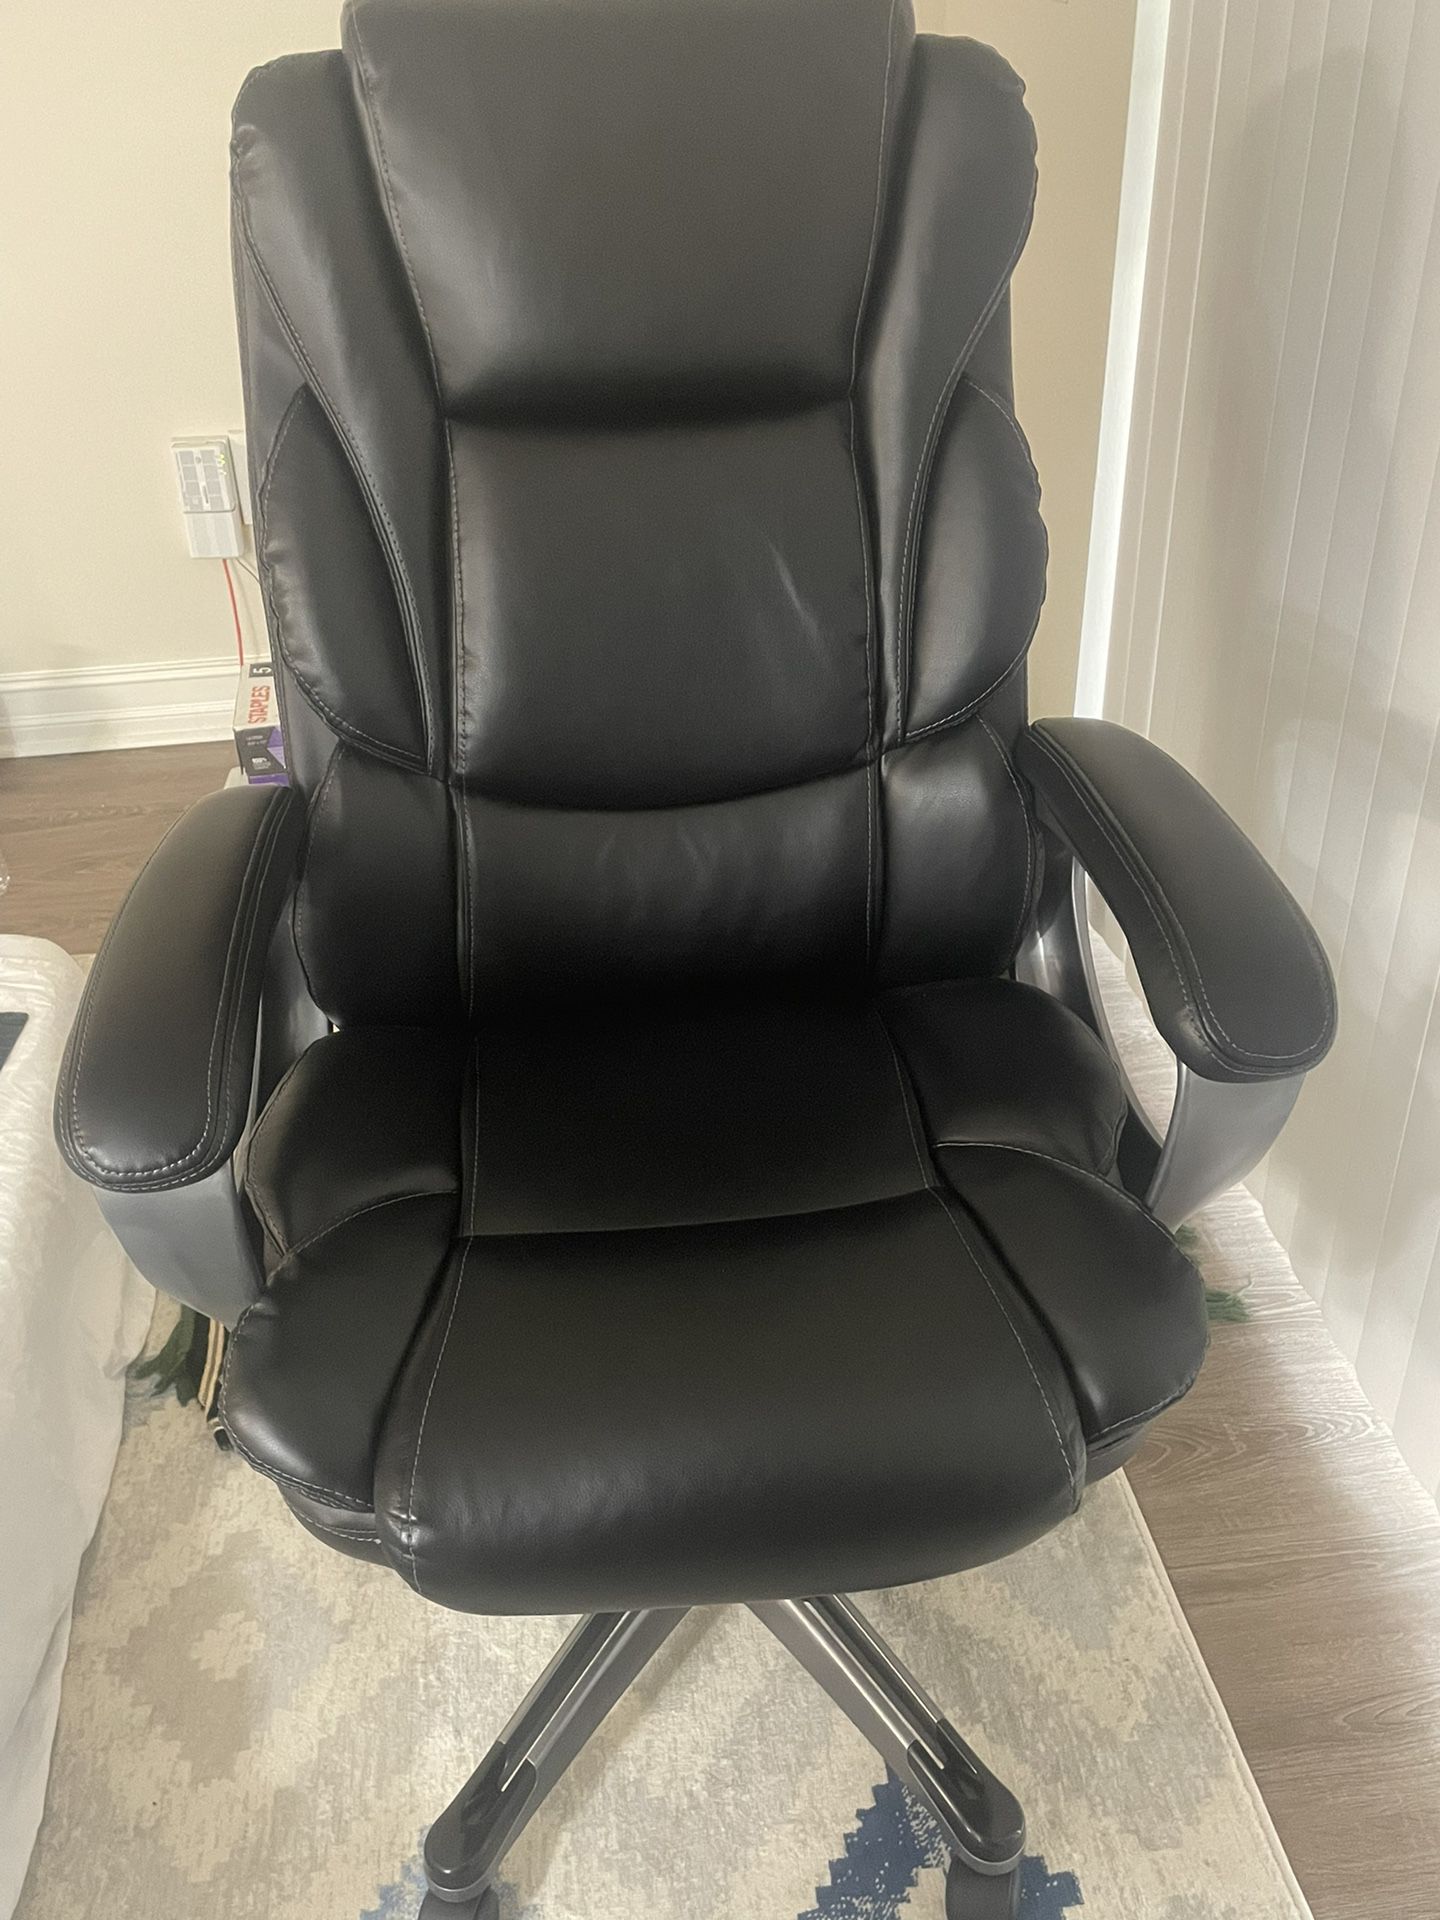 Office Chair In Excellent Condition From Office Depot for Sale in Hialeah,  FL - OfferUp